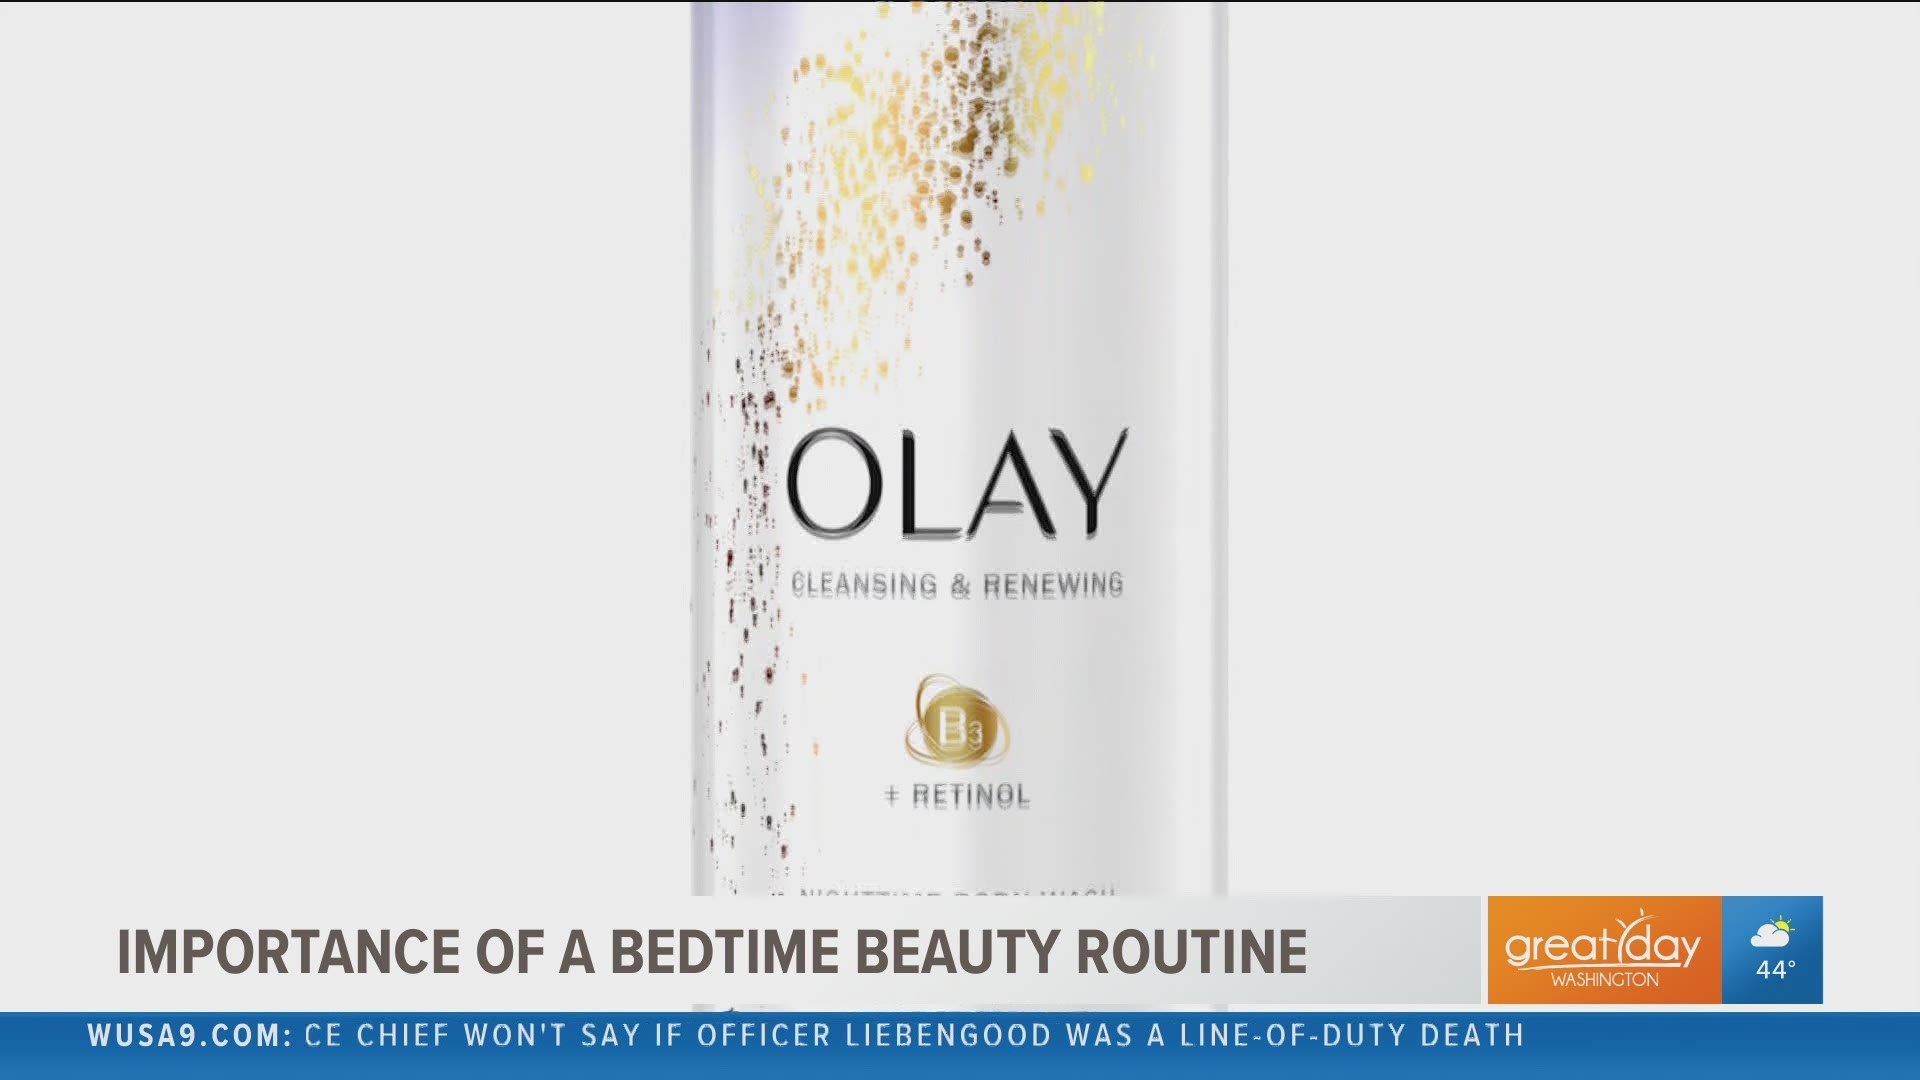 Sponsored by Olay. Visit Olay.com to enhance your beauty routine,